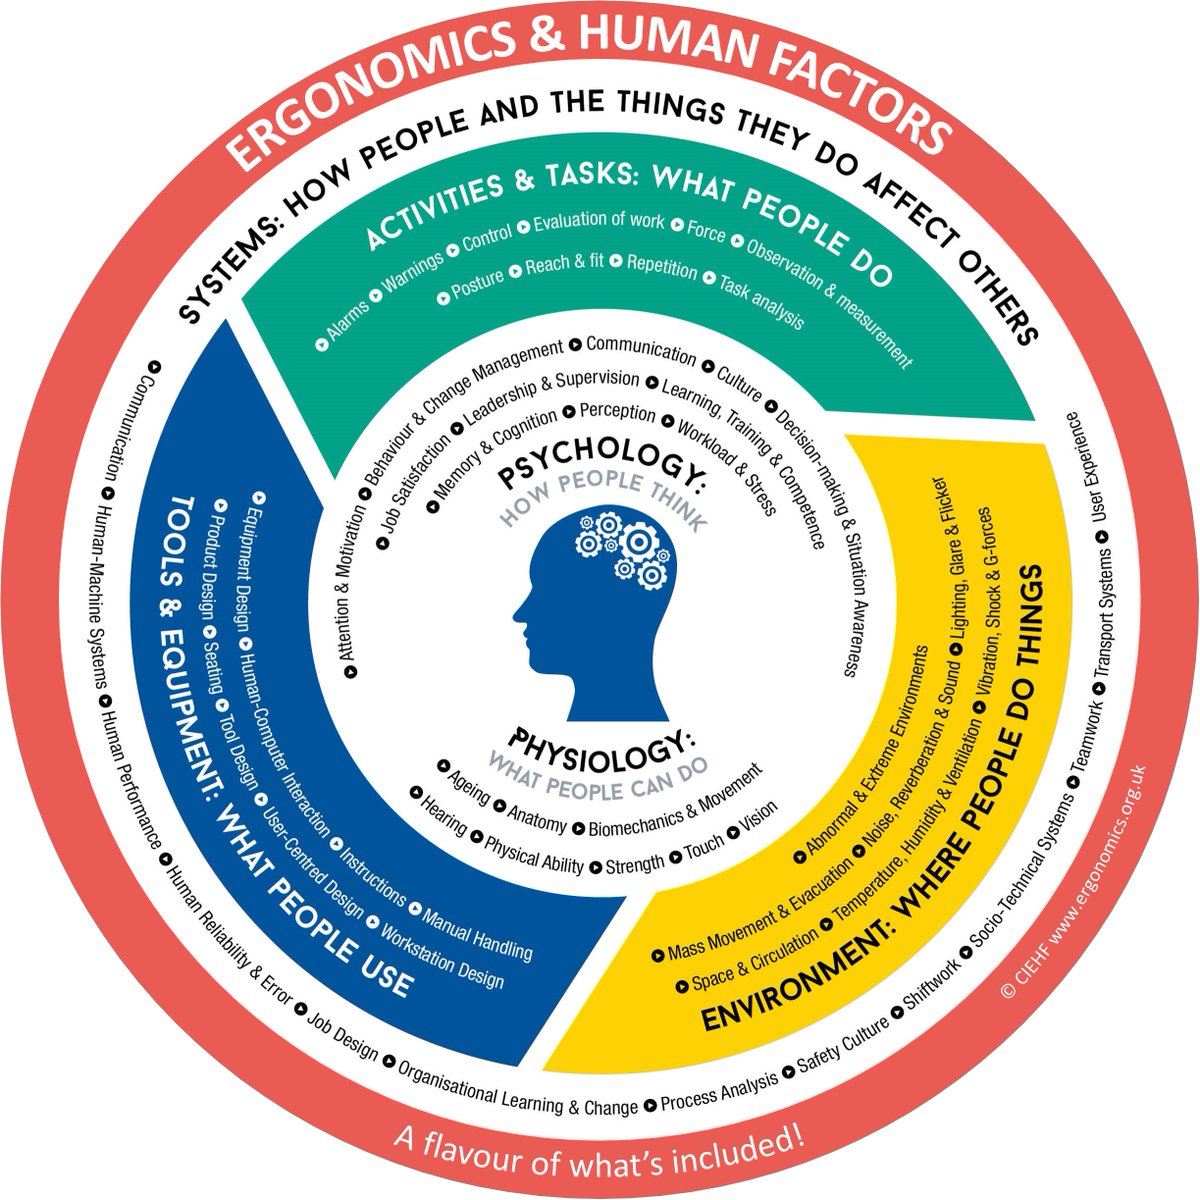 I still love this illustration as it so nicely shows the breadth of Human Factors and Ergonomics! @CIEHF #Humanfactors #ergonomics